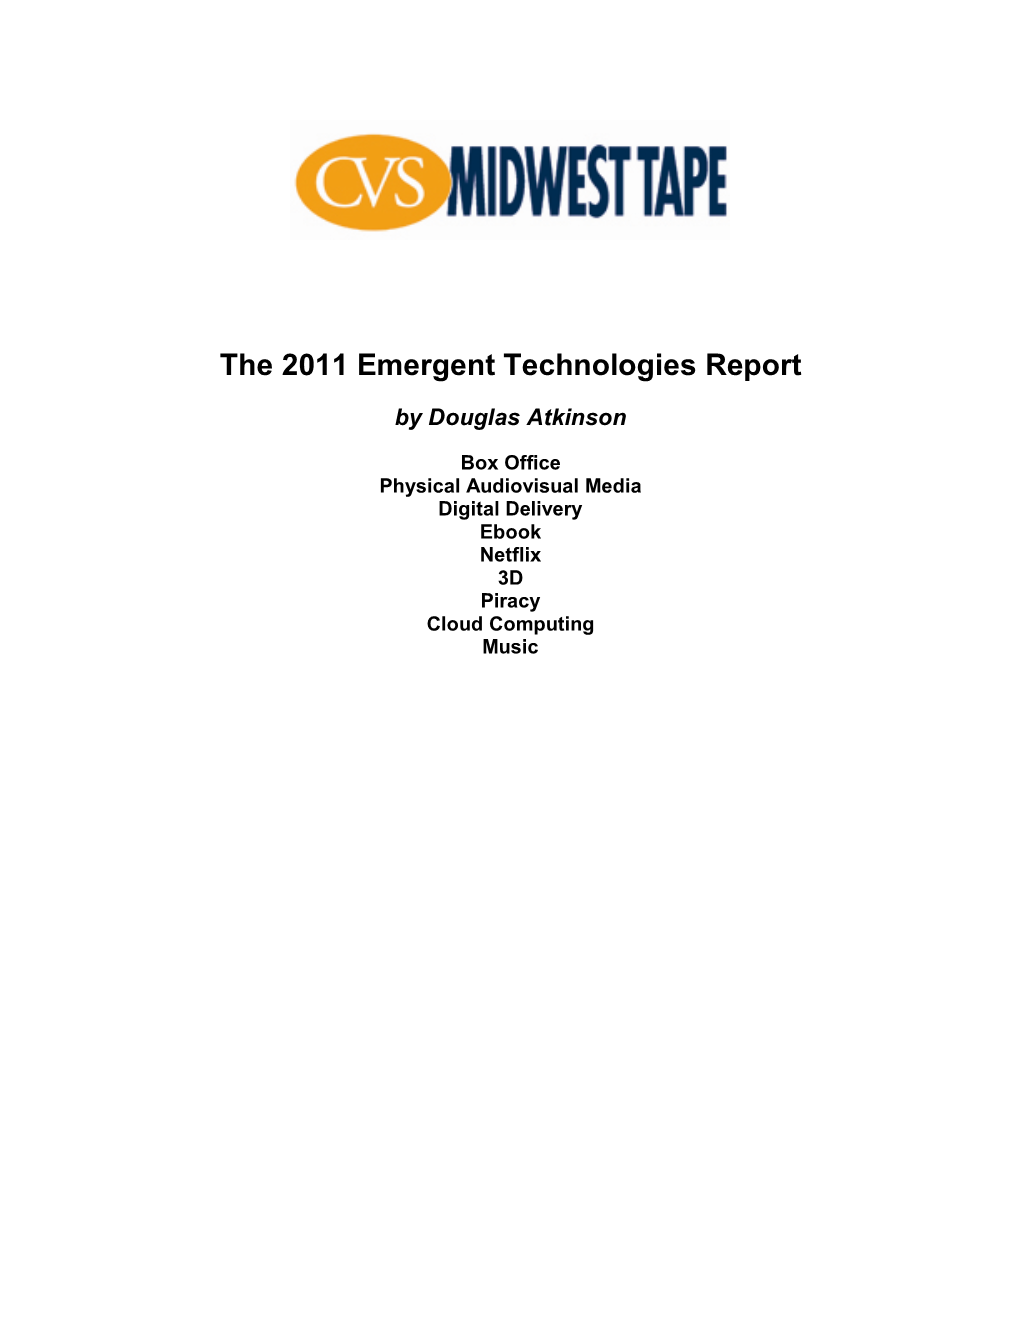 The 2011 Emergent Technologies Report